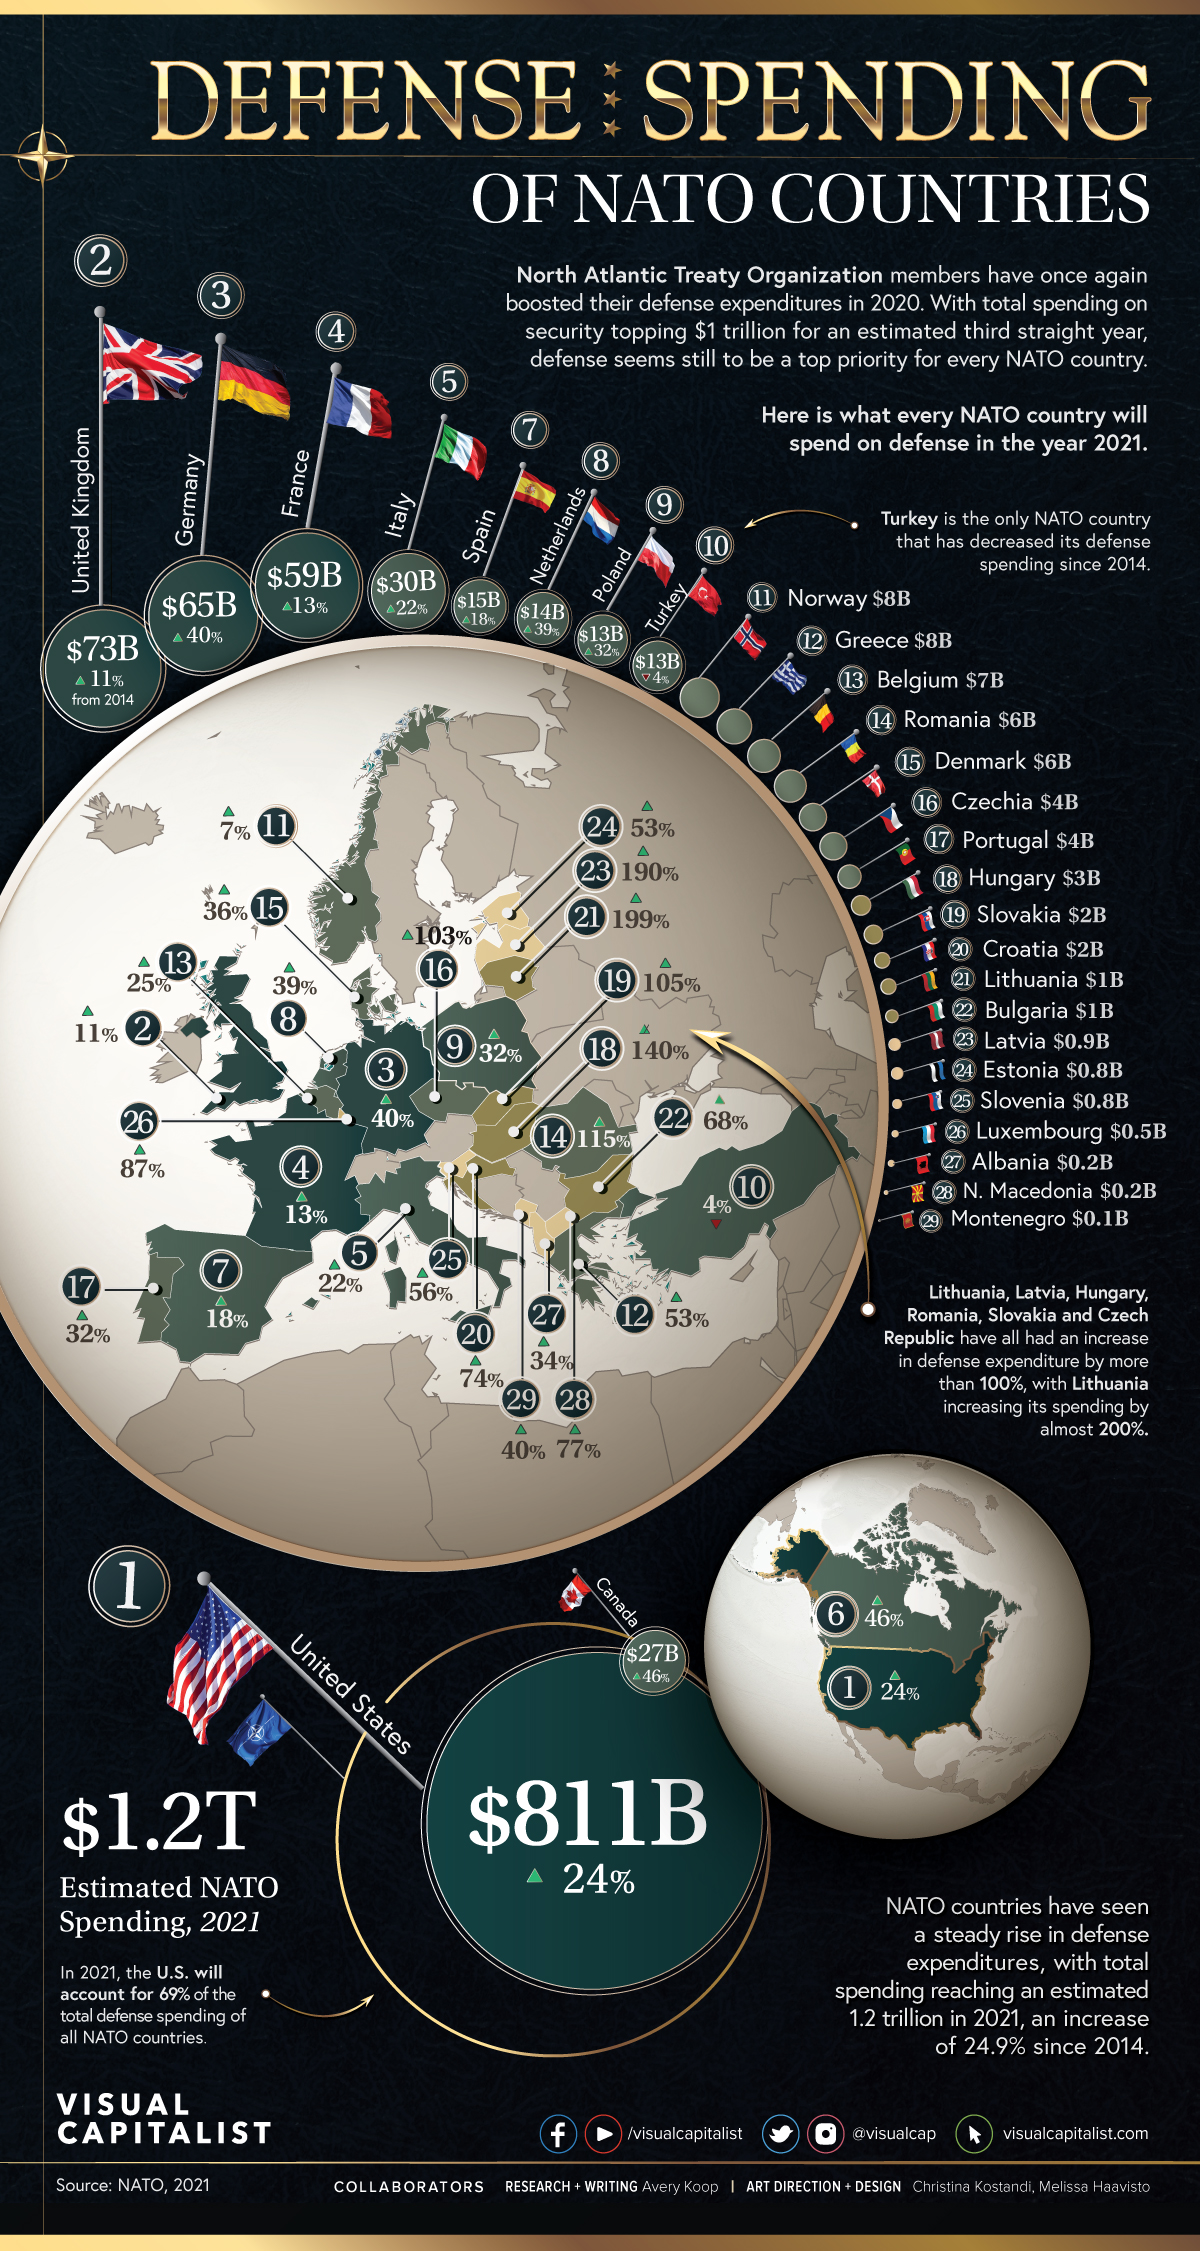 Defense spending of NATO countries infographic